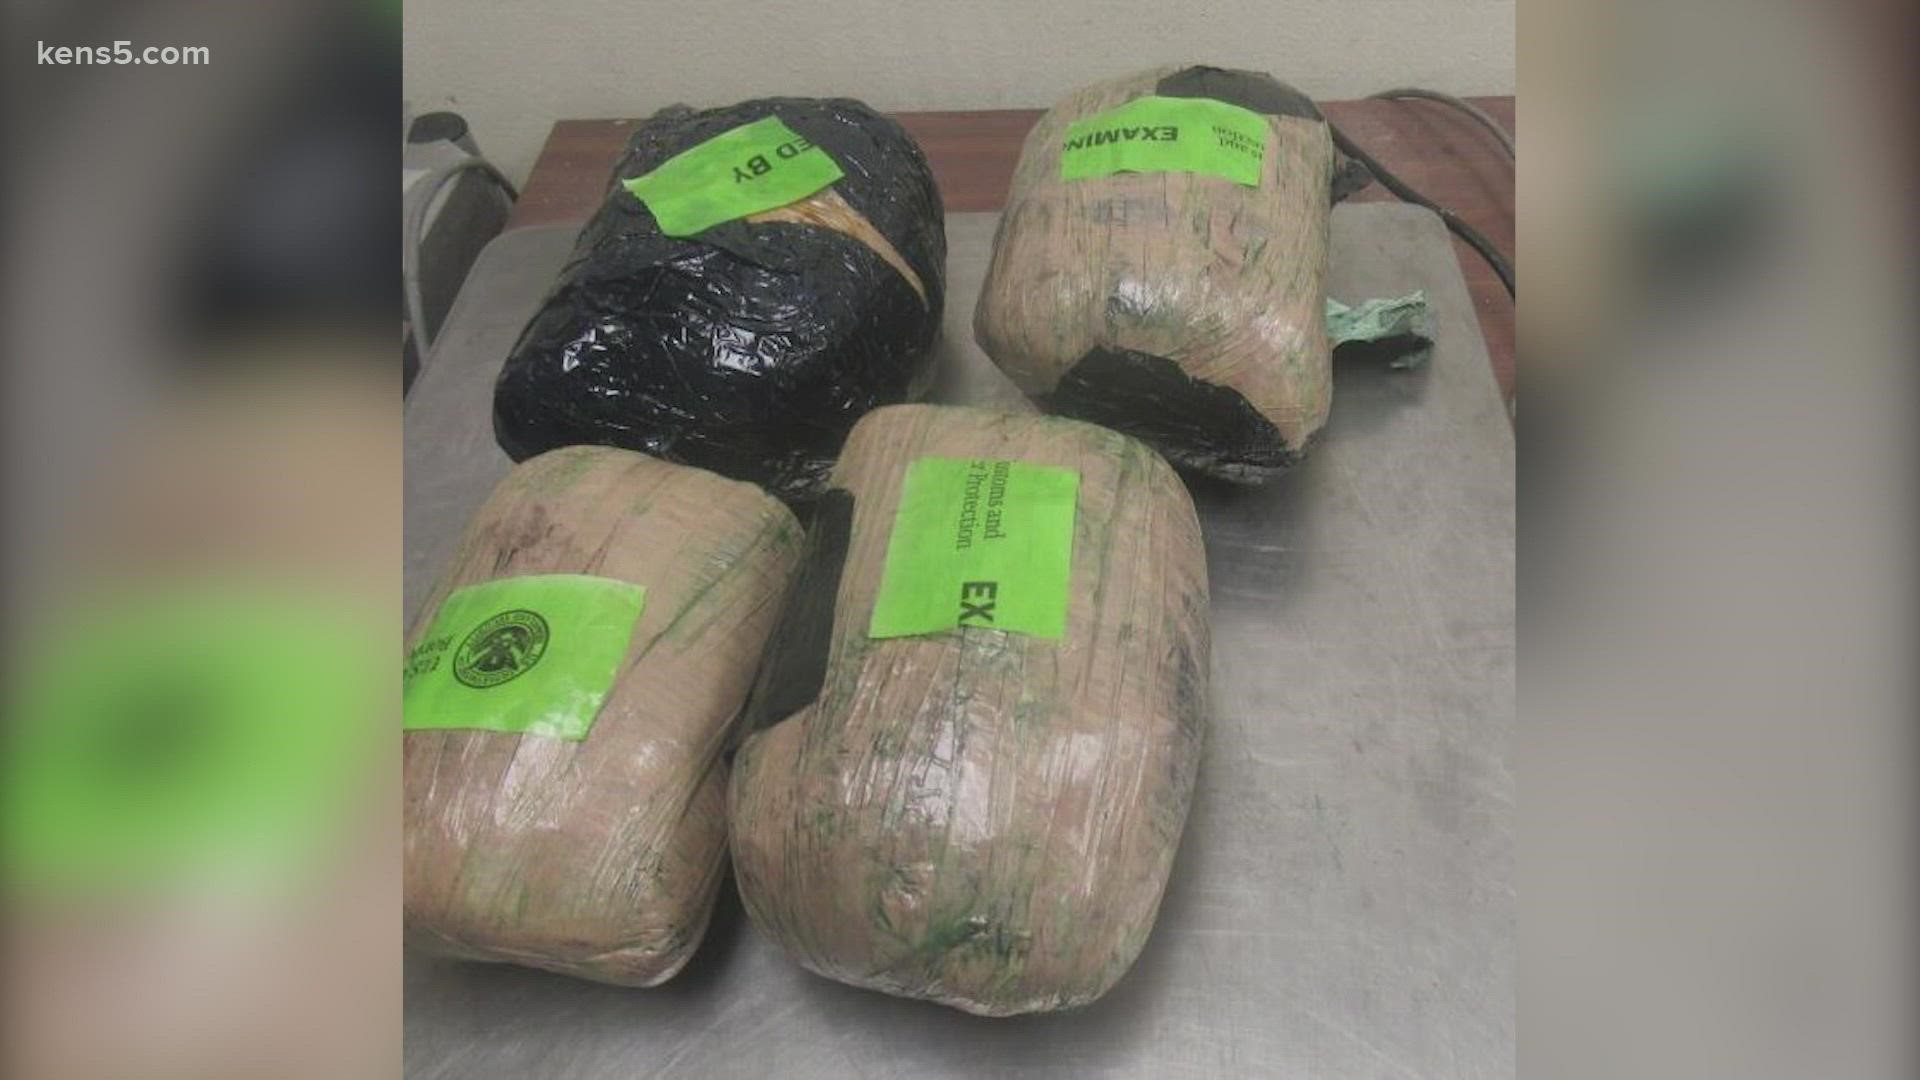 Officials said they found the drugs during two separate stops when drivers were trying to enter the U.S. at the Hidalgo International Bridge.